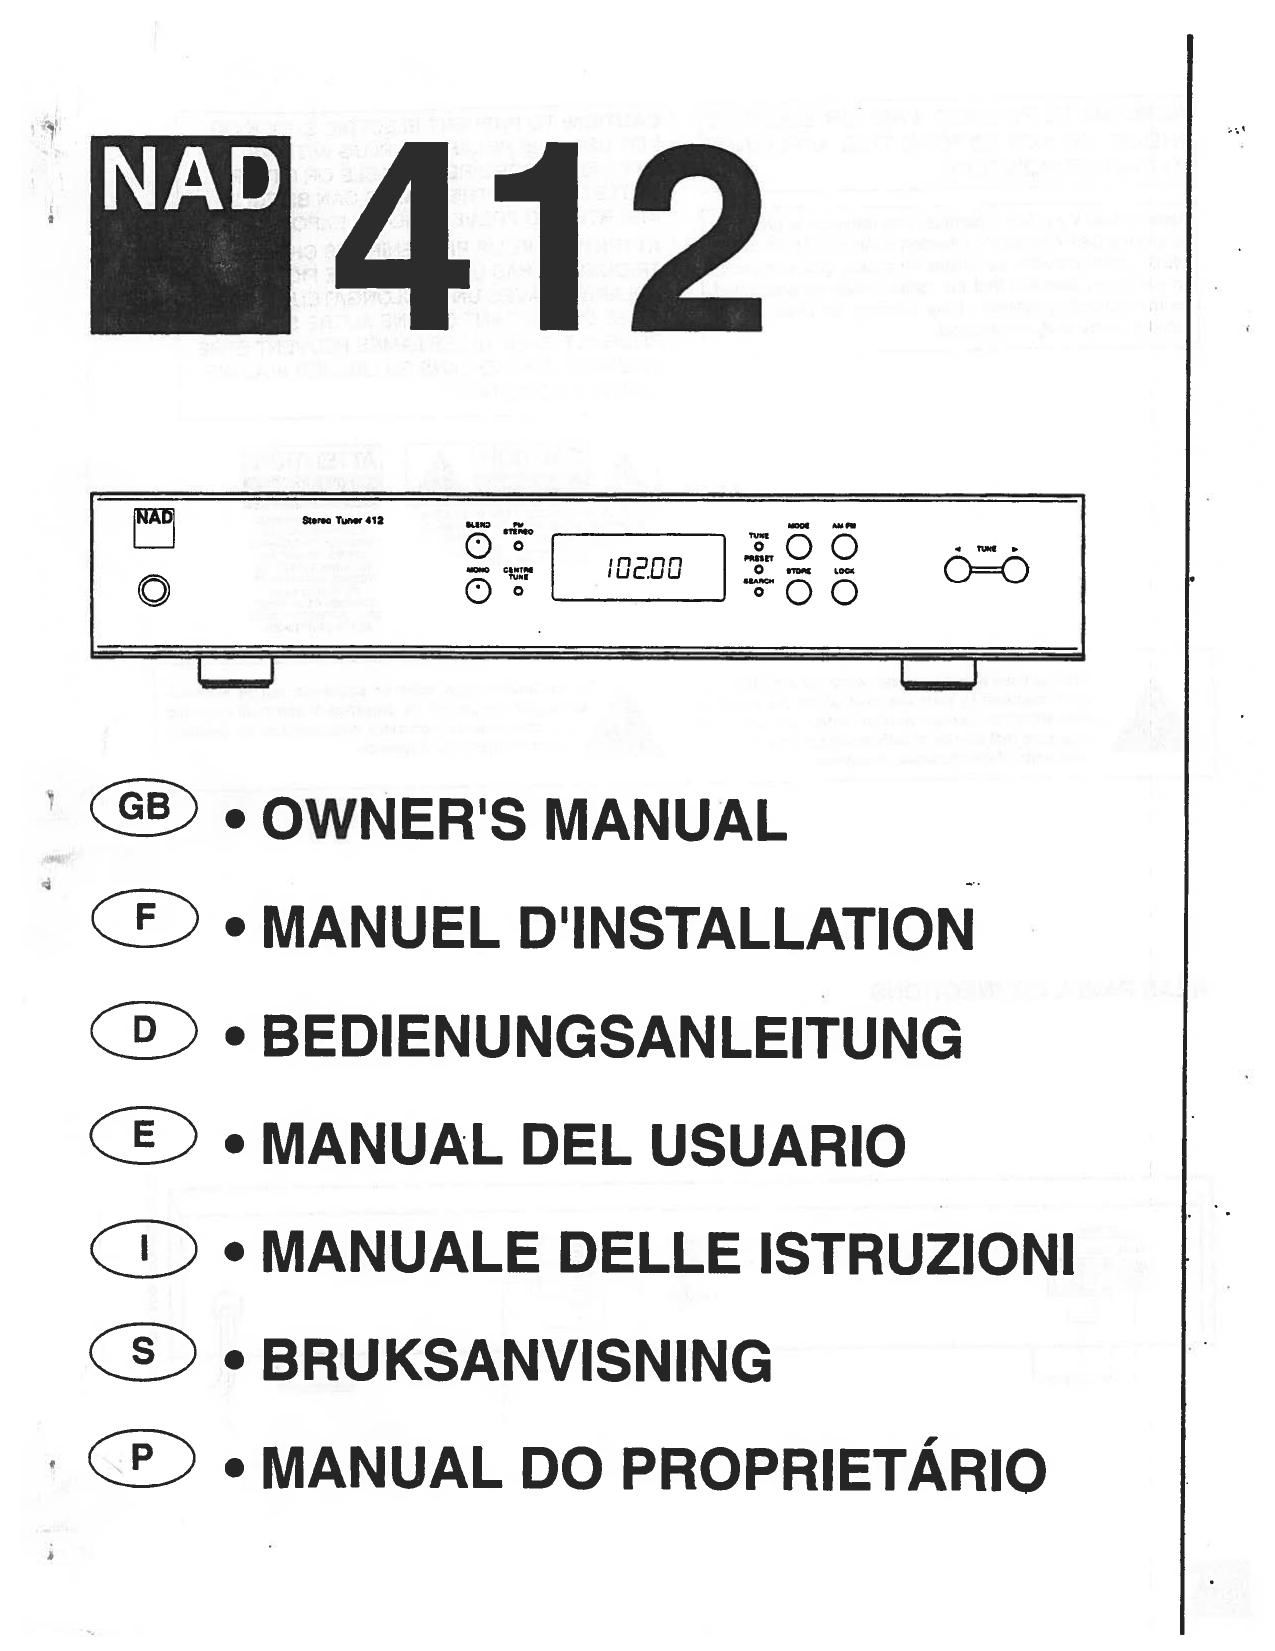 Nad 412 Owners Manual